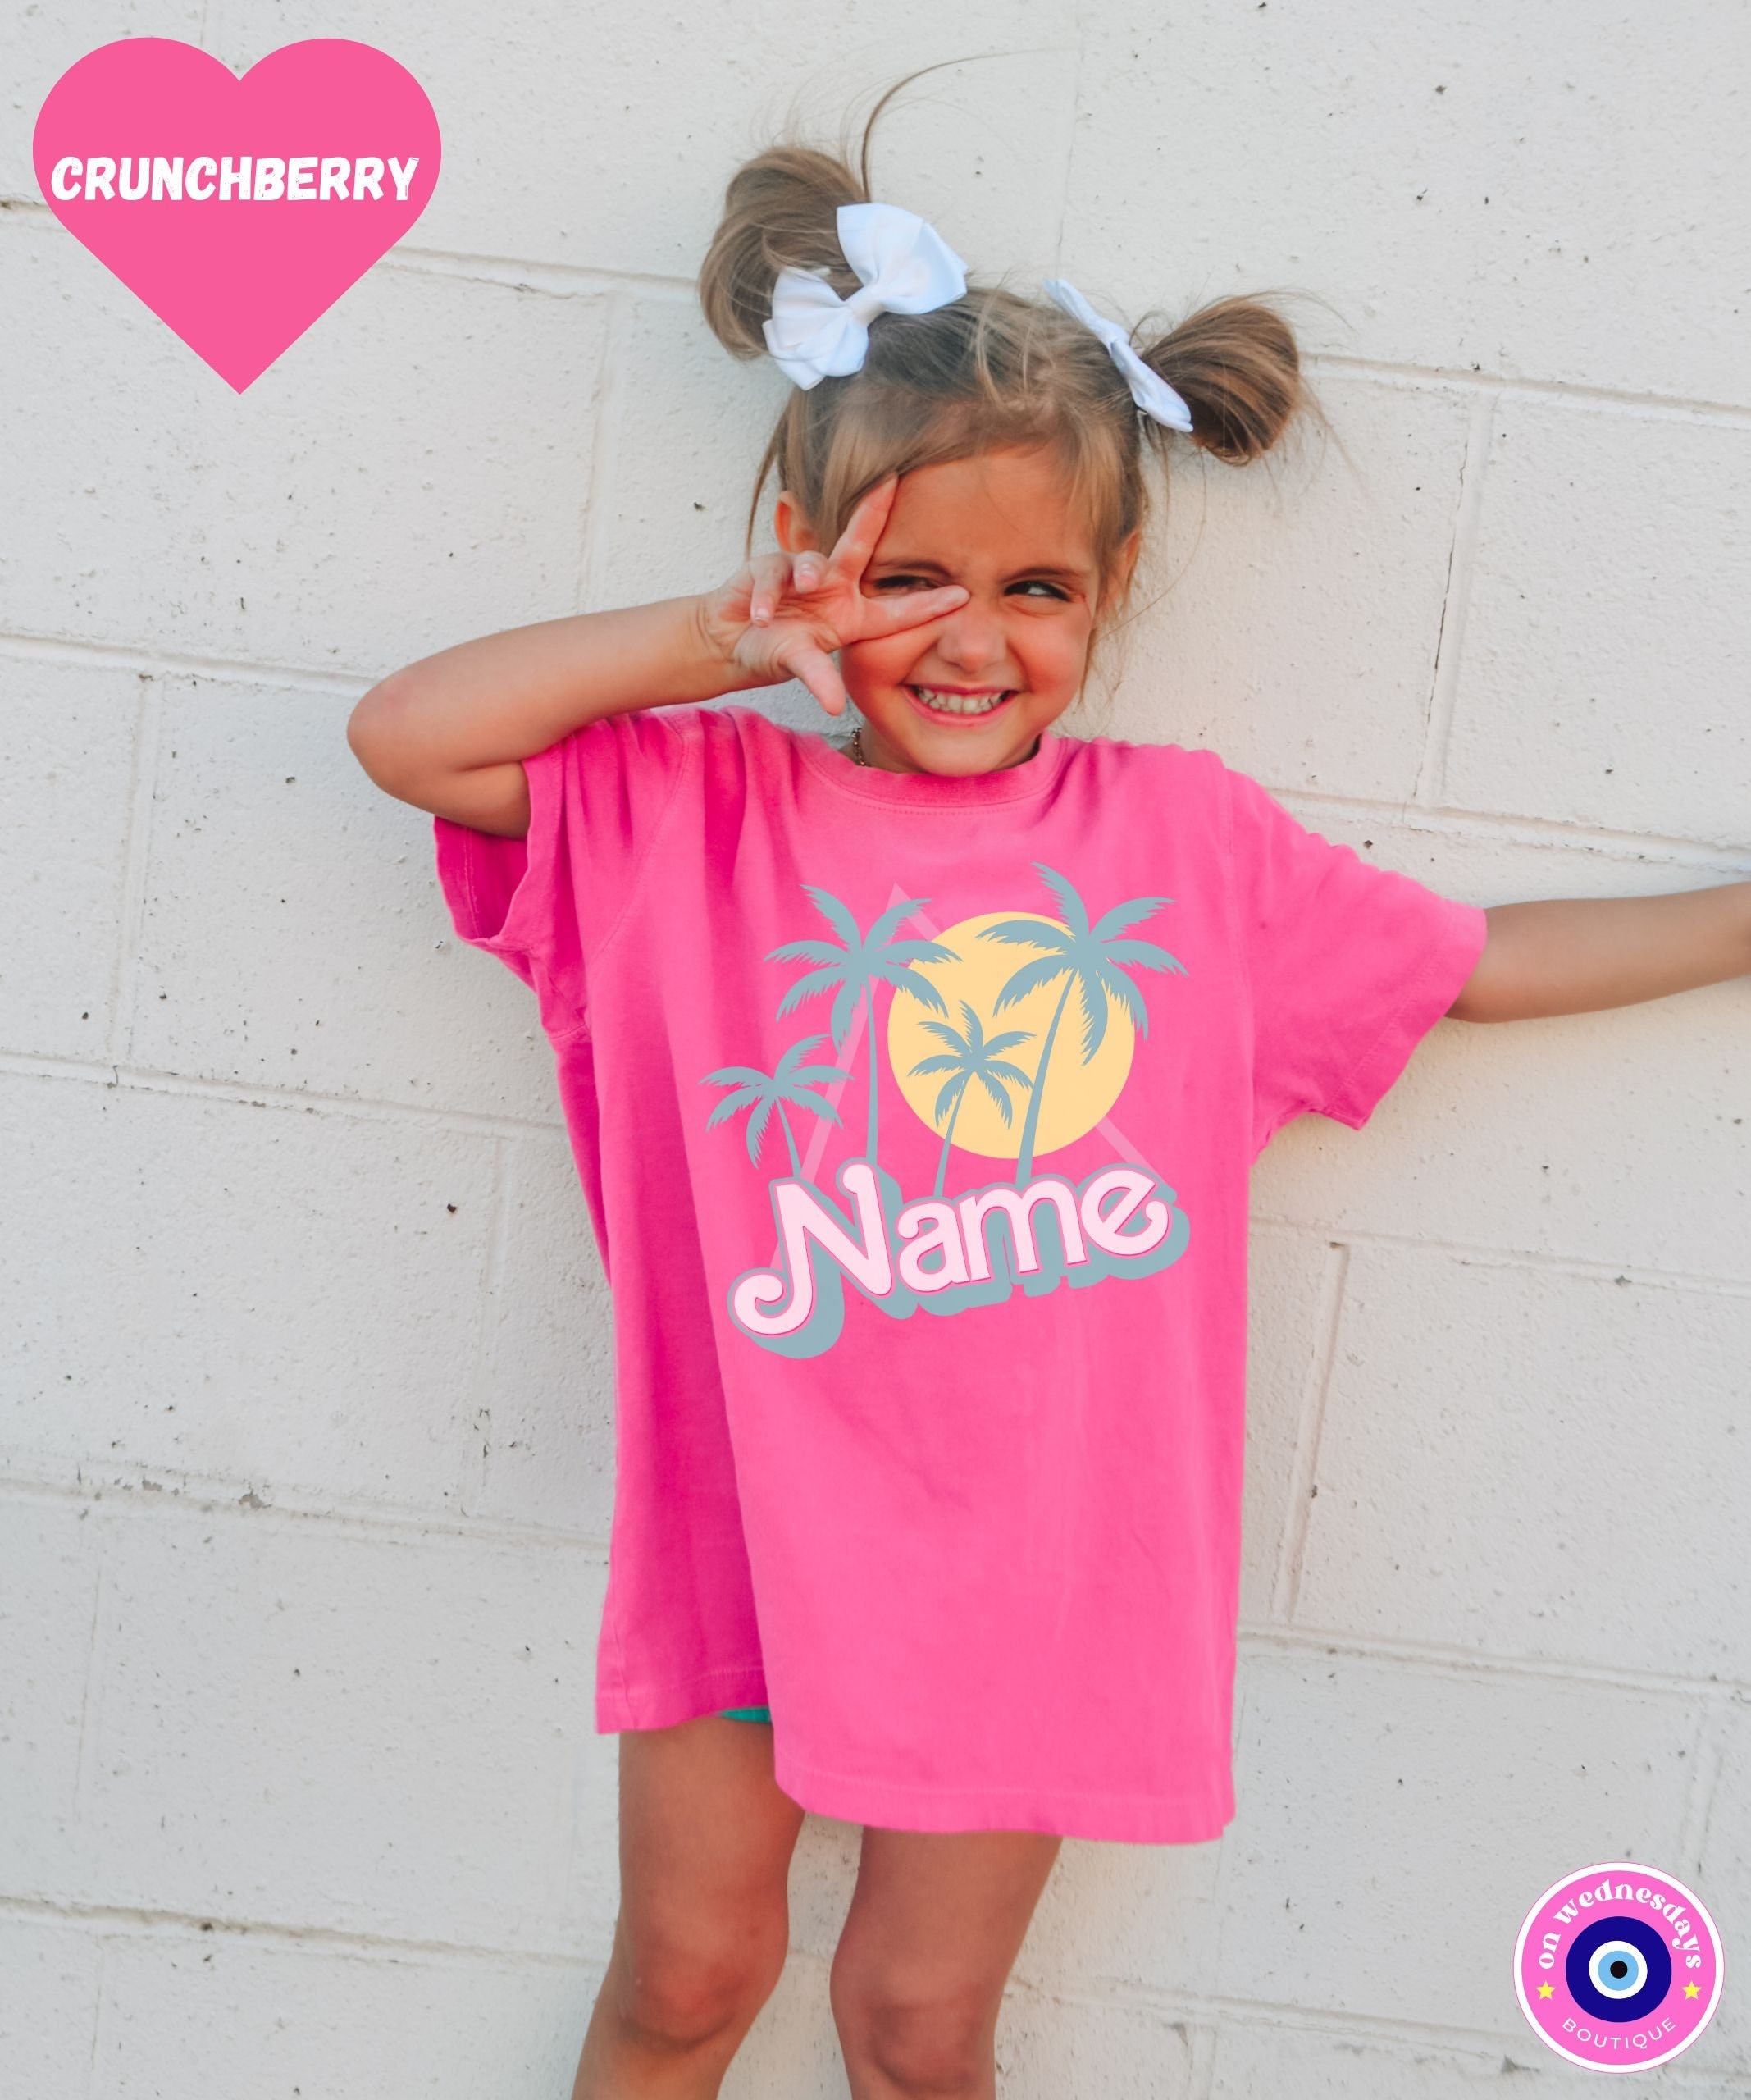 Barbie T-shirts & Leggings For Girls, Kids Outfits